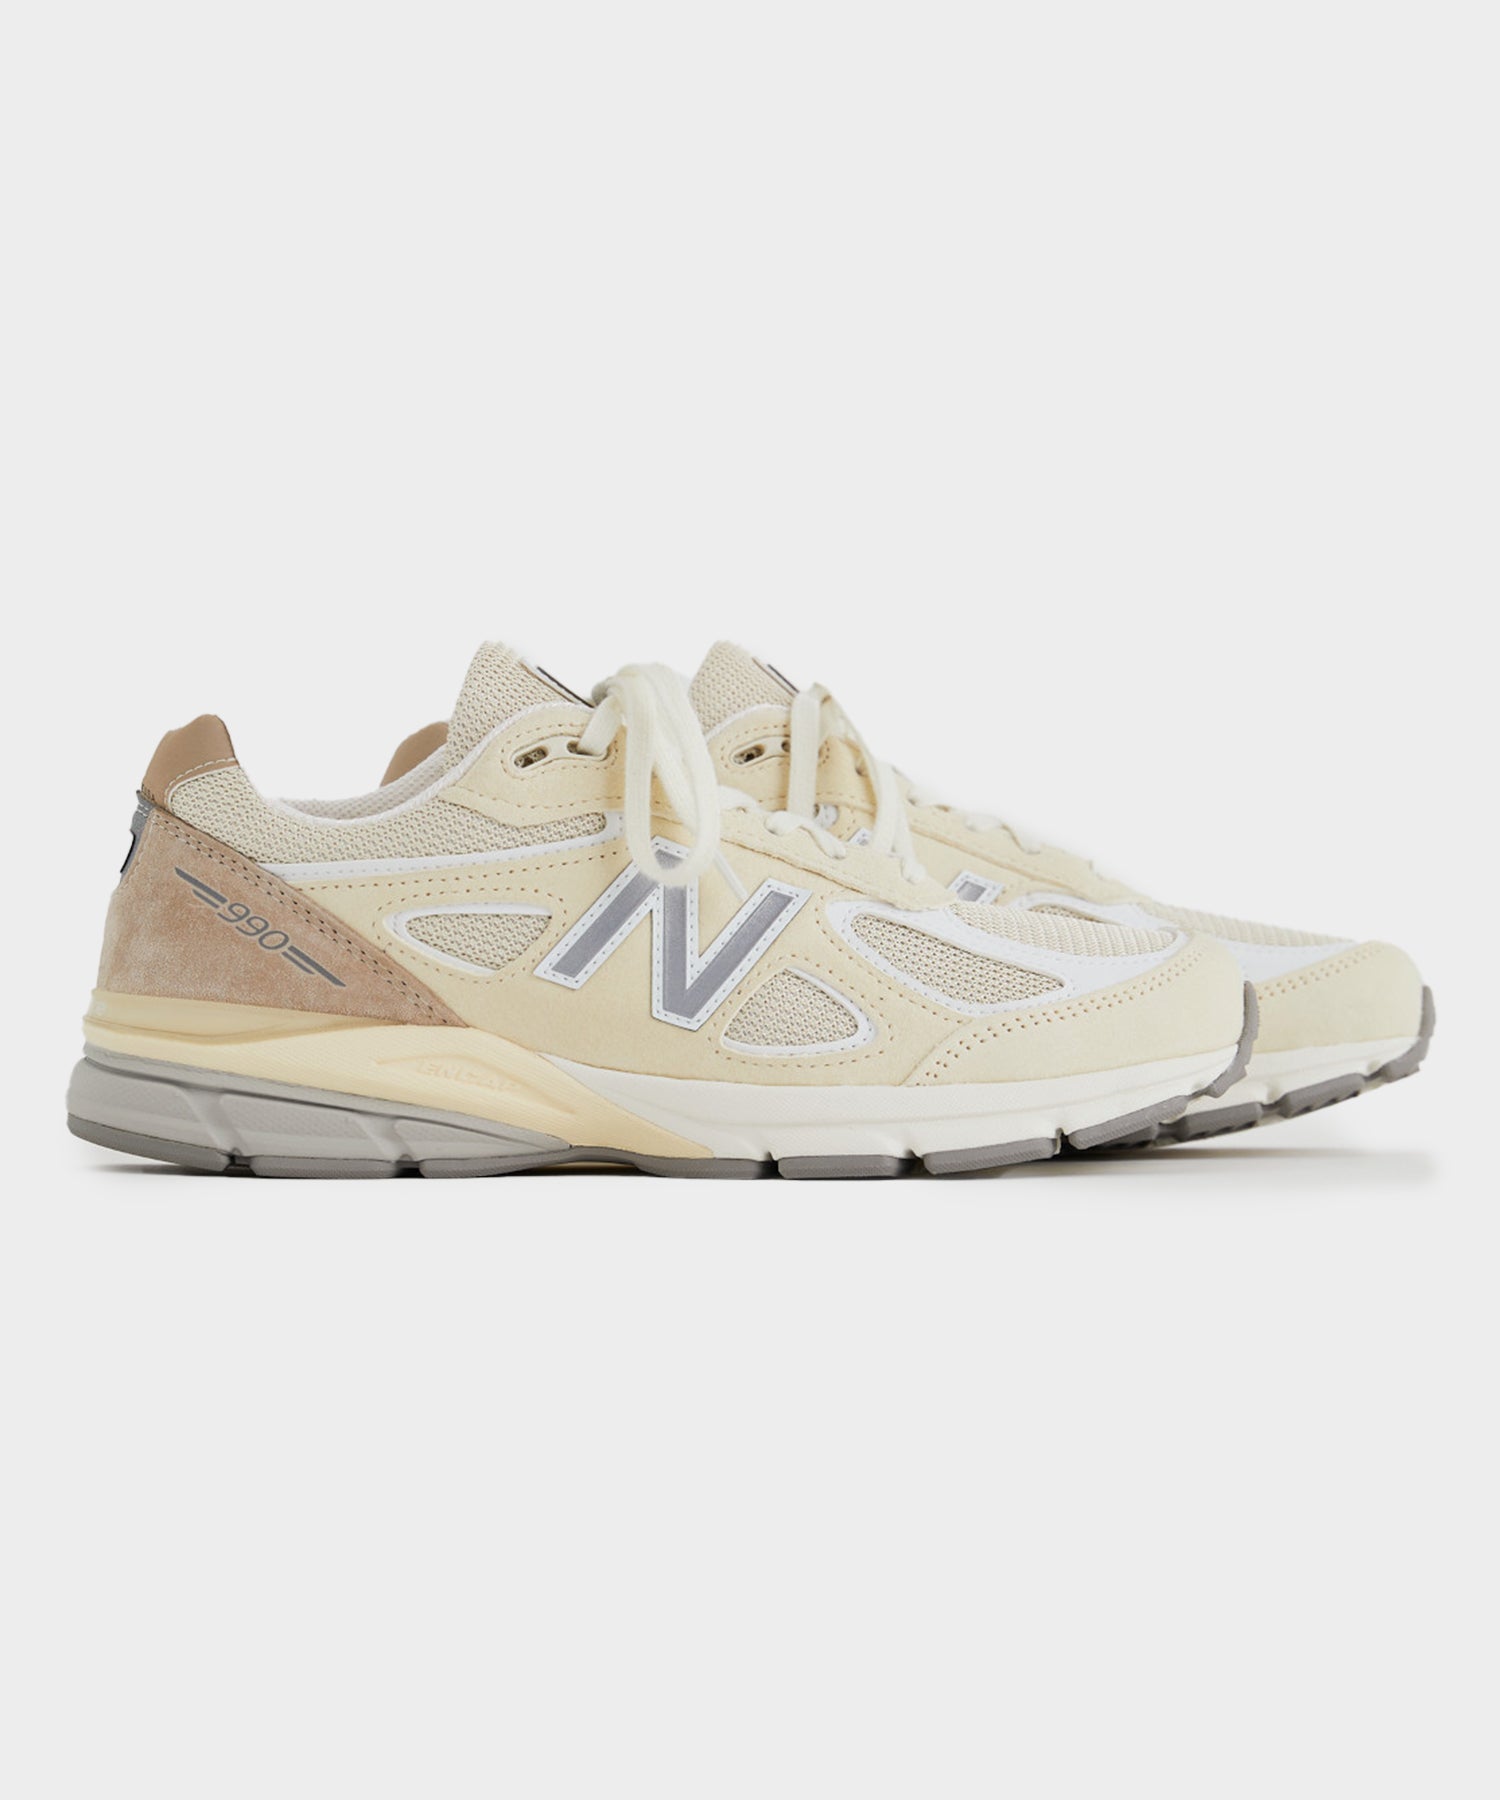 New Balance Made in the US 990v4 Limestone